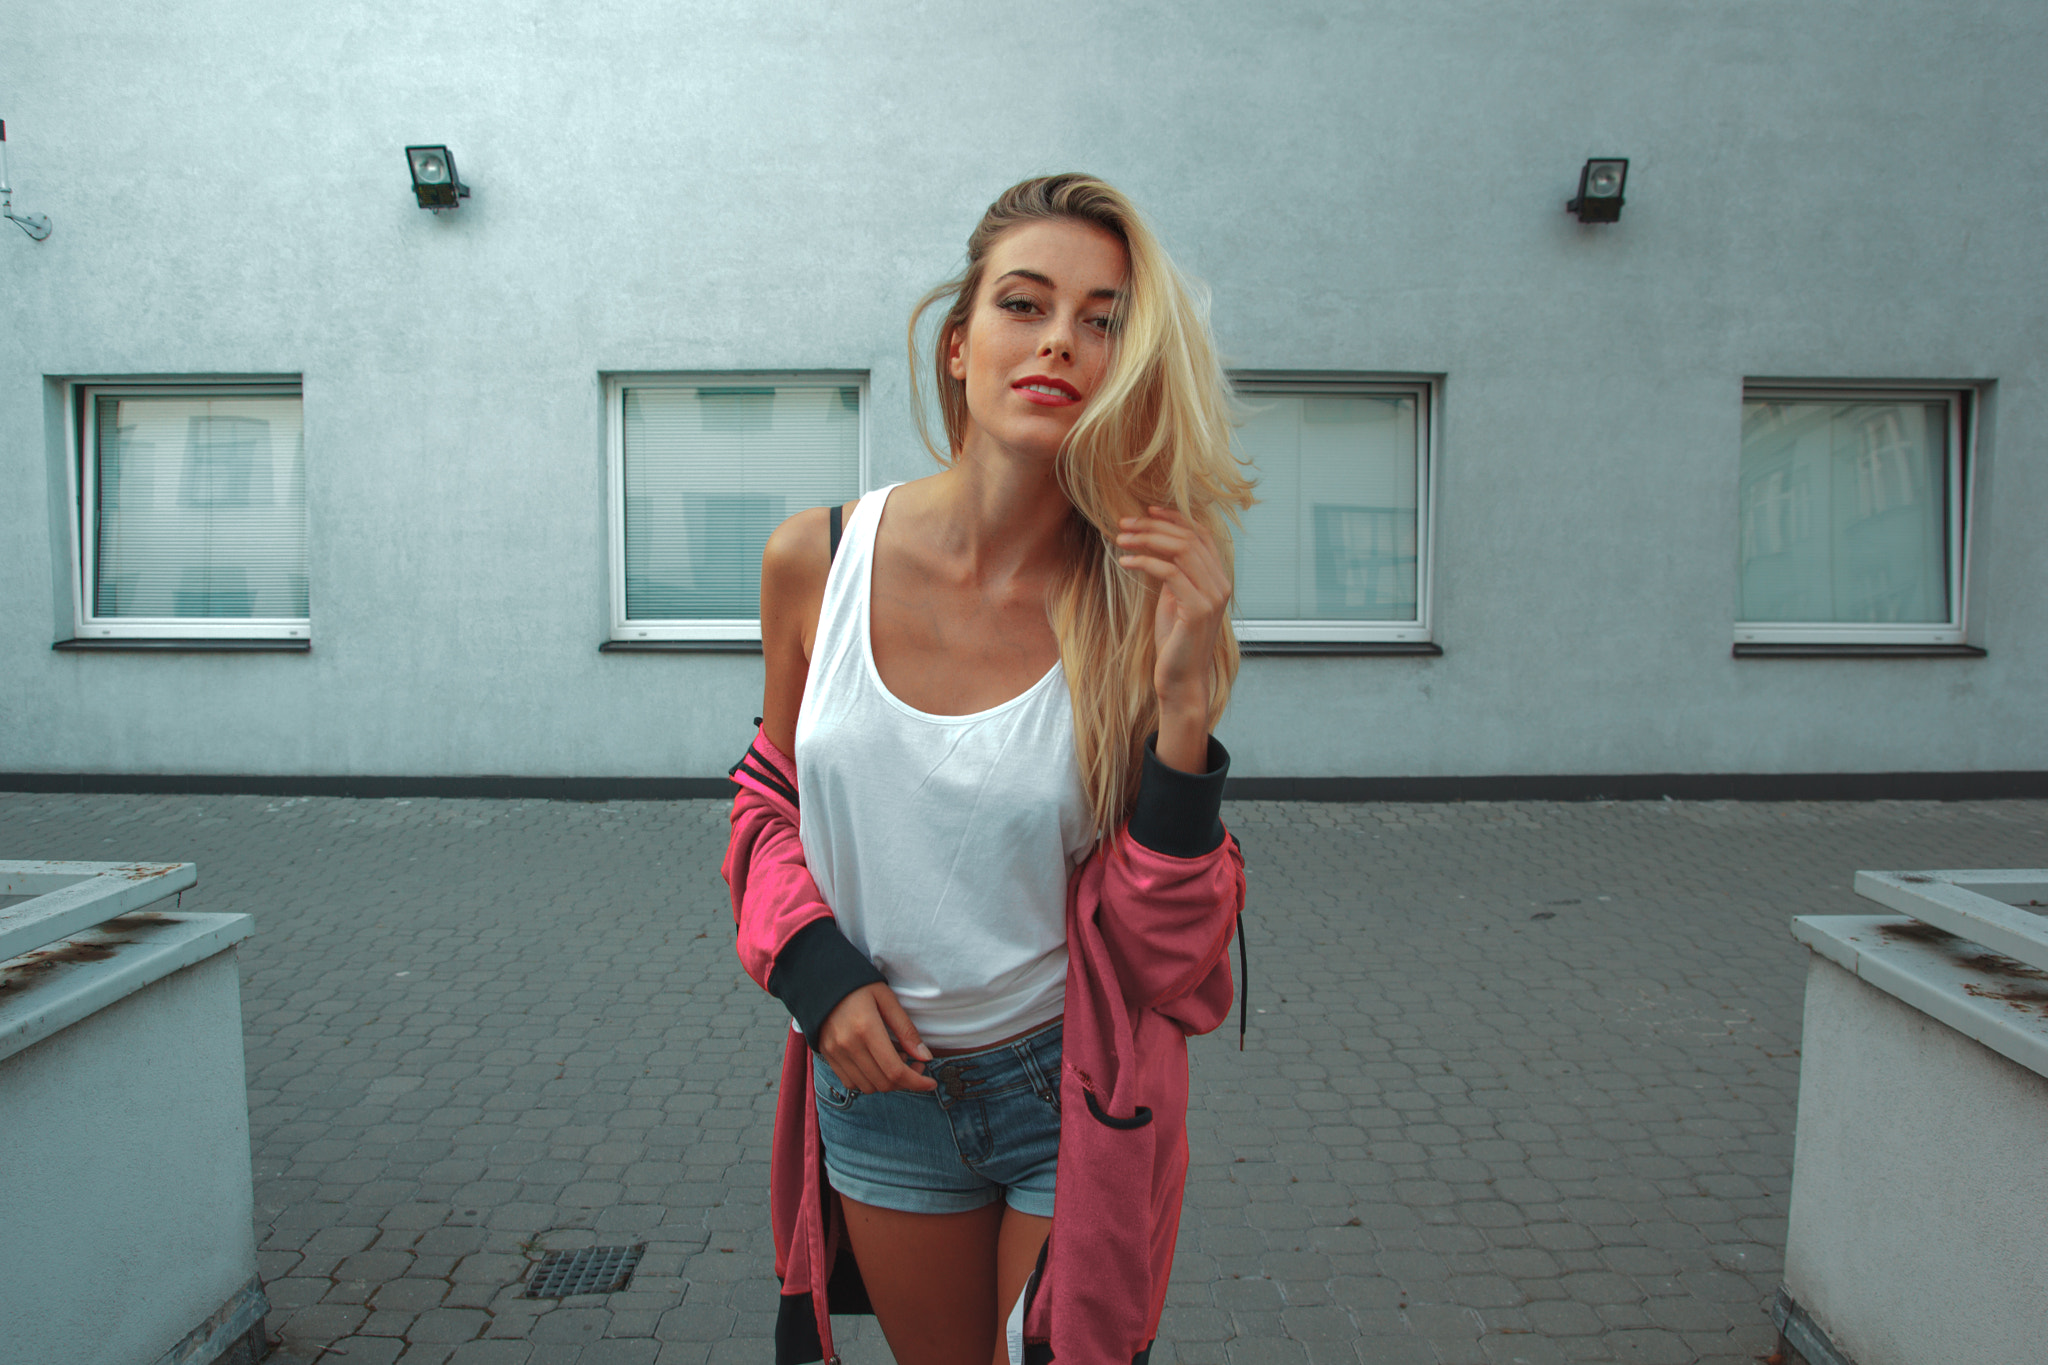 People 2048x1365 women blonde jean shorts sweater tanned portrait smiling red lipstick white tops